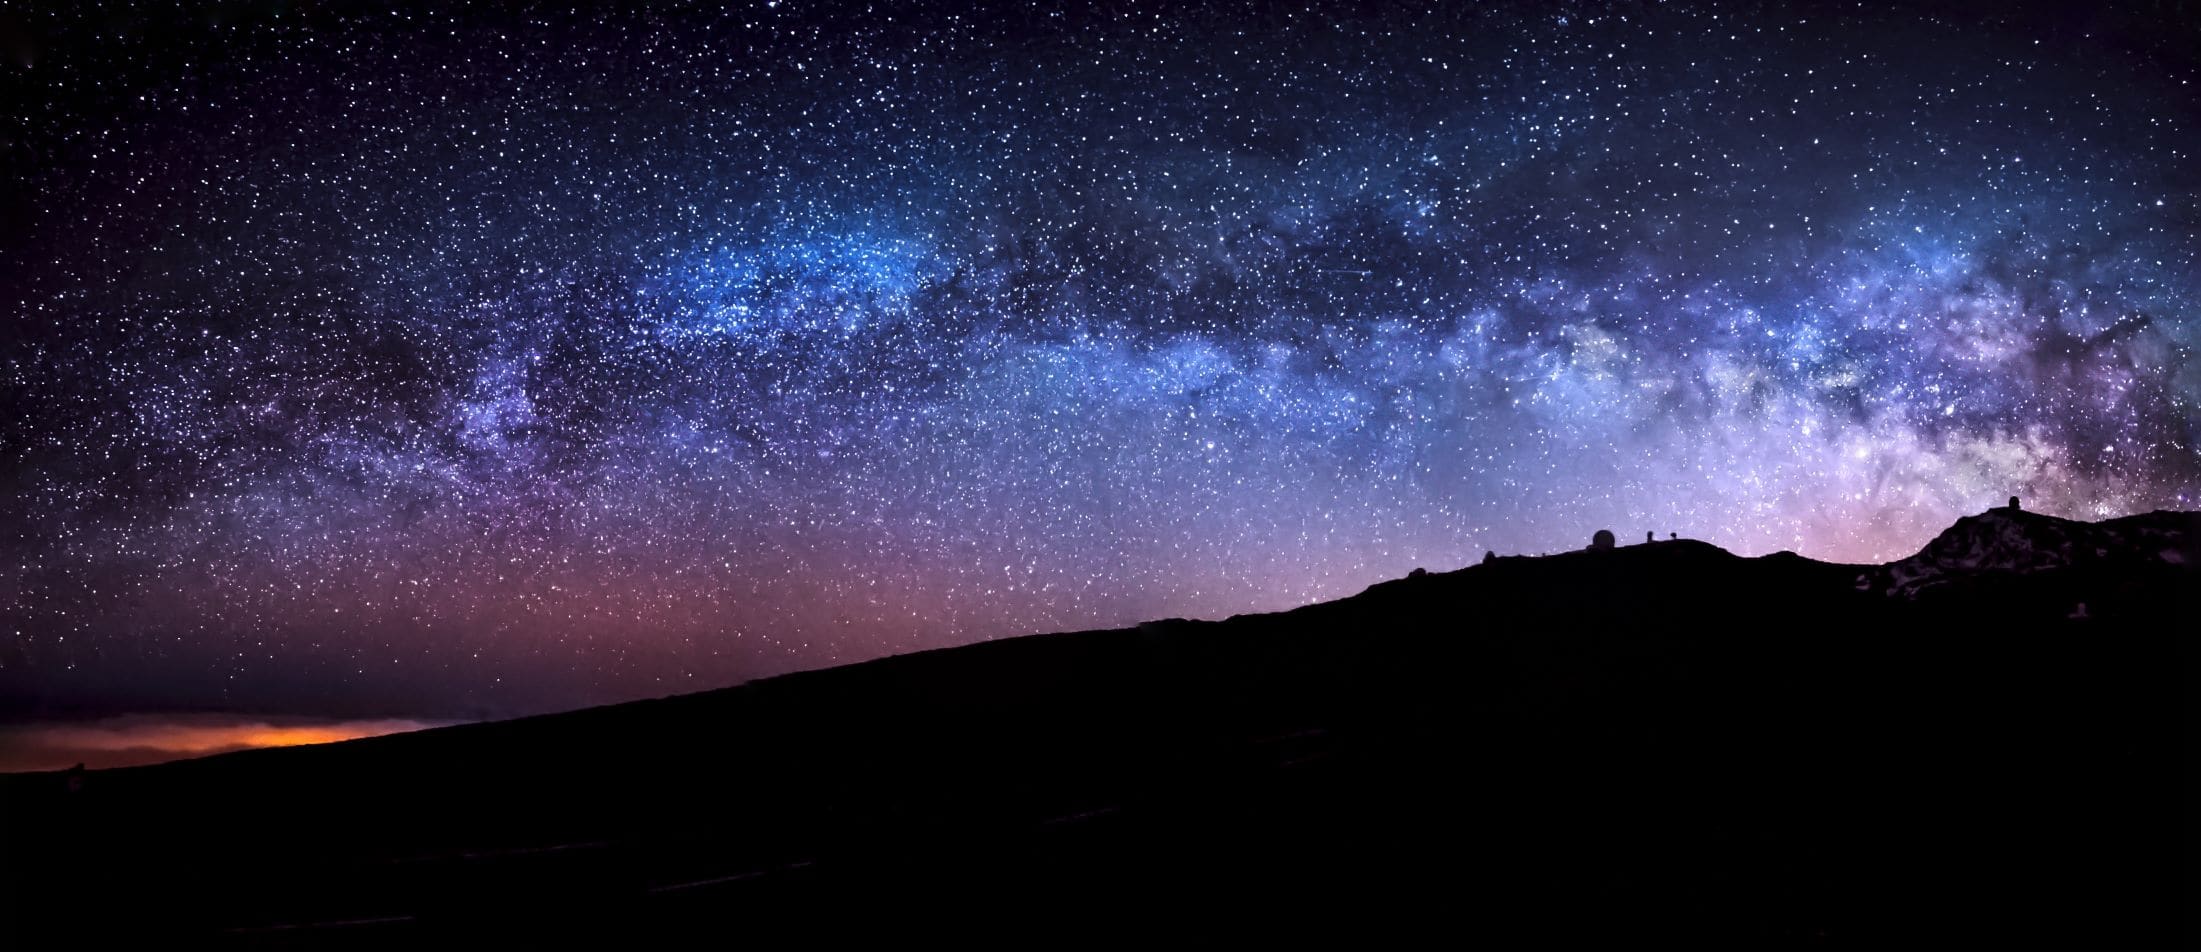 See the Milky Way at the Roque de los Muchachos Observatory